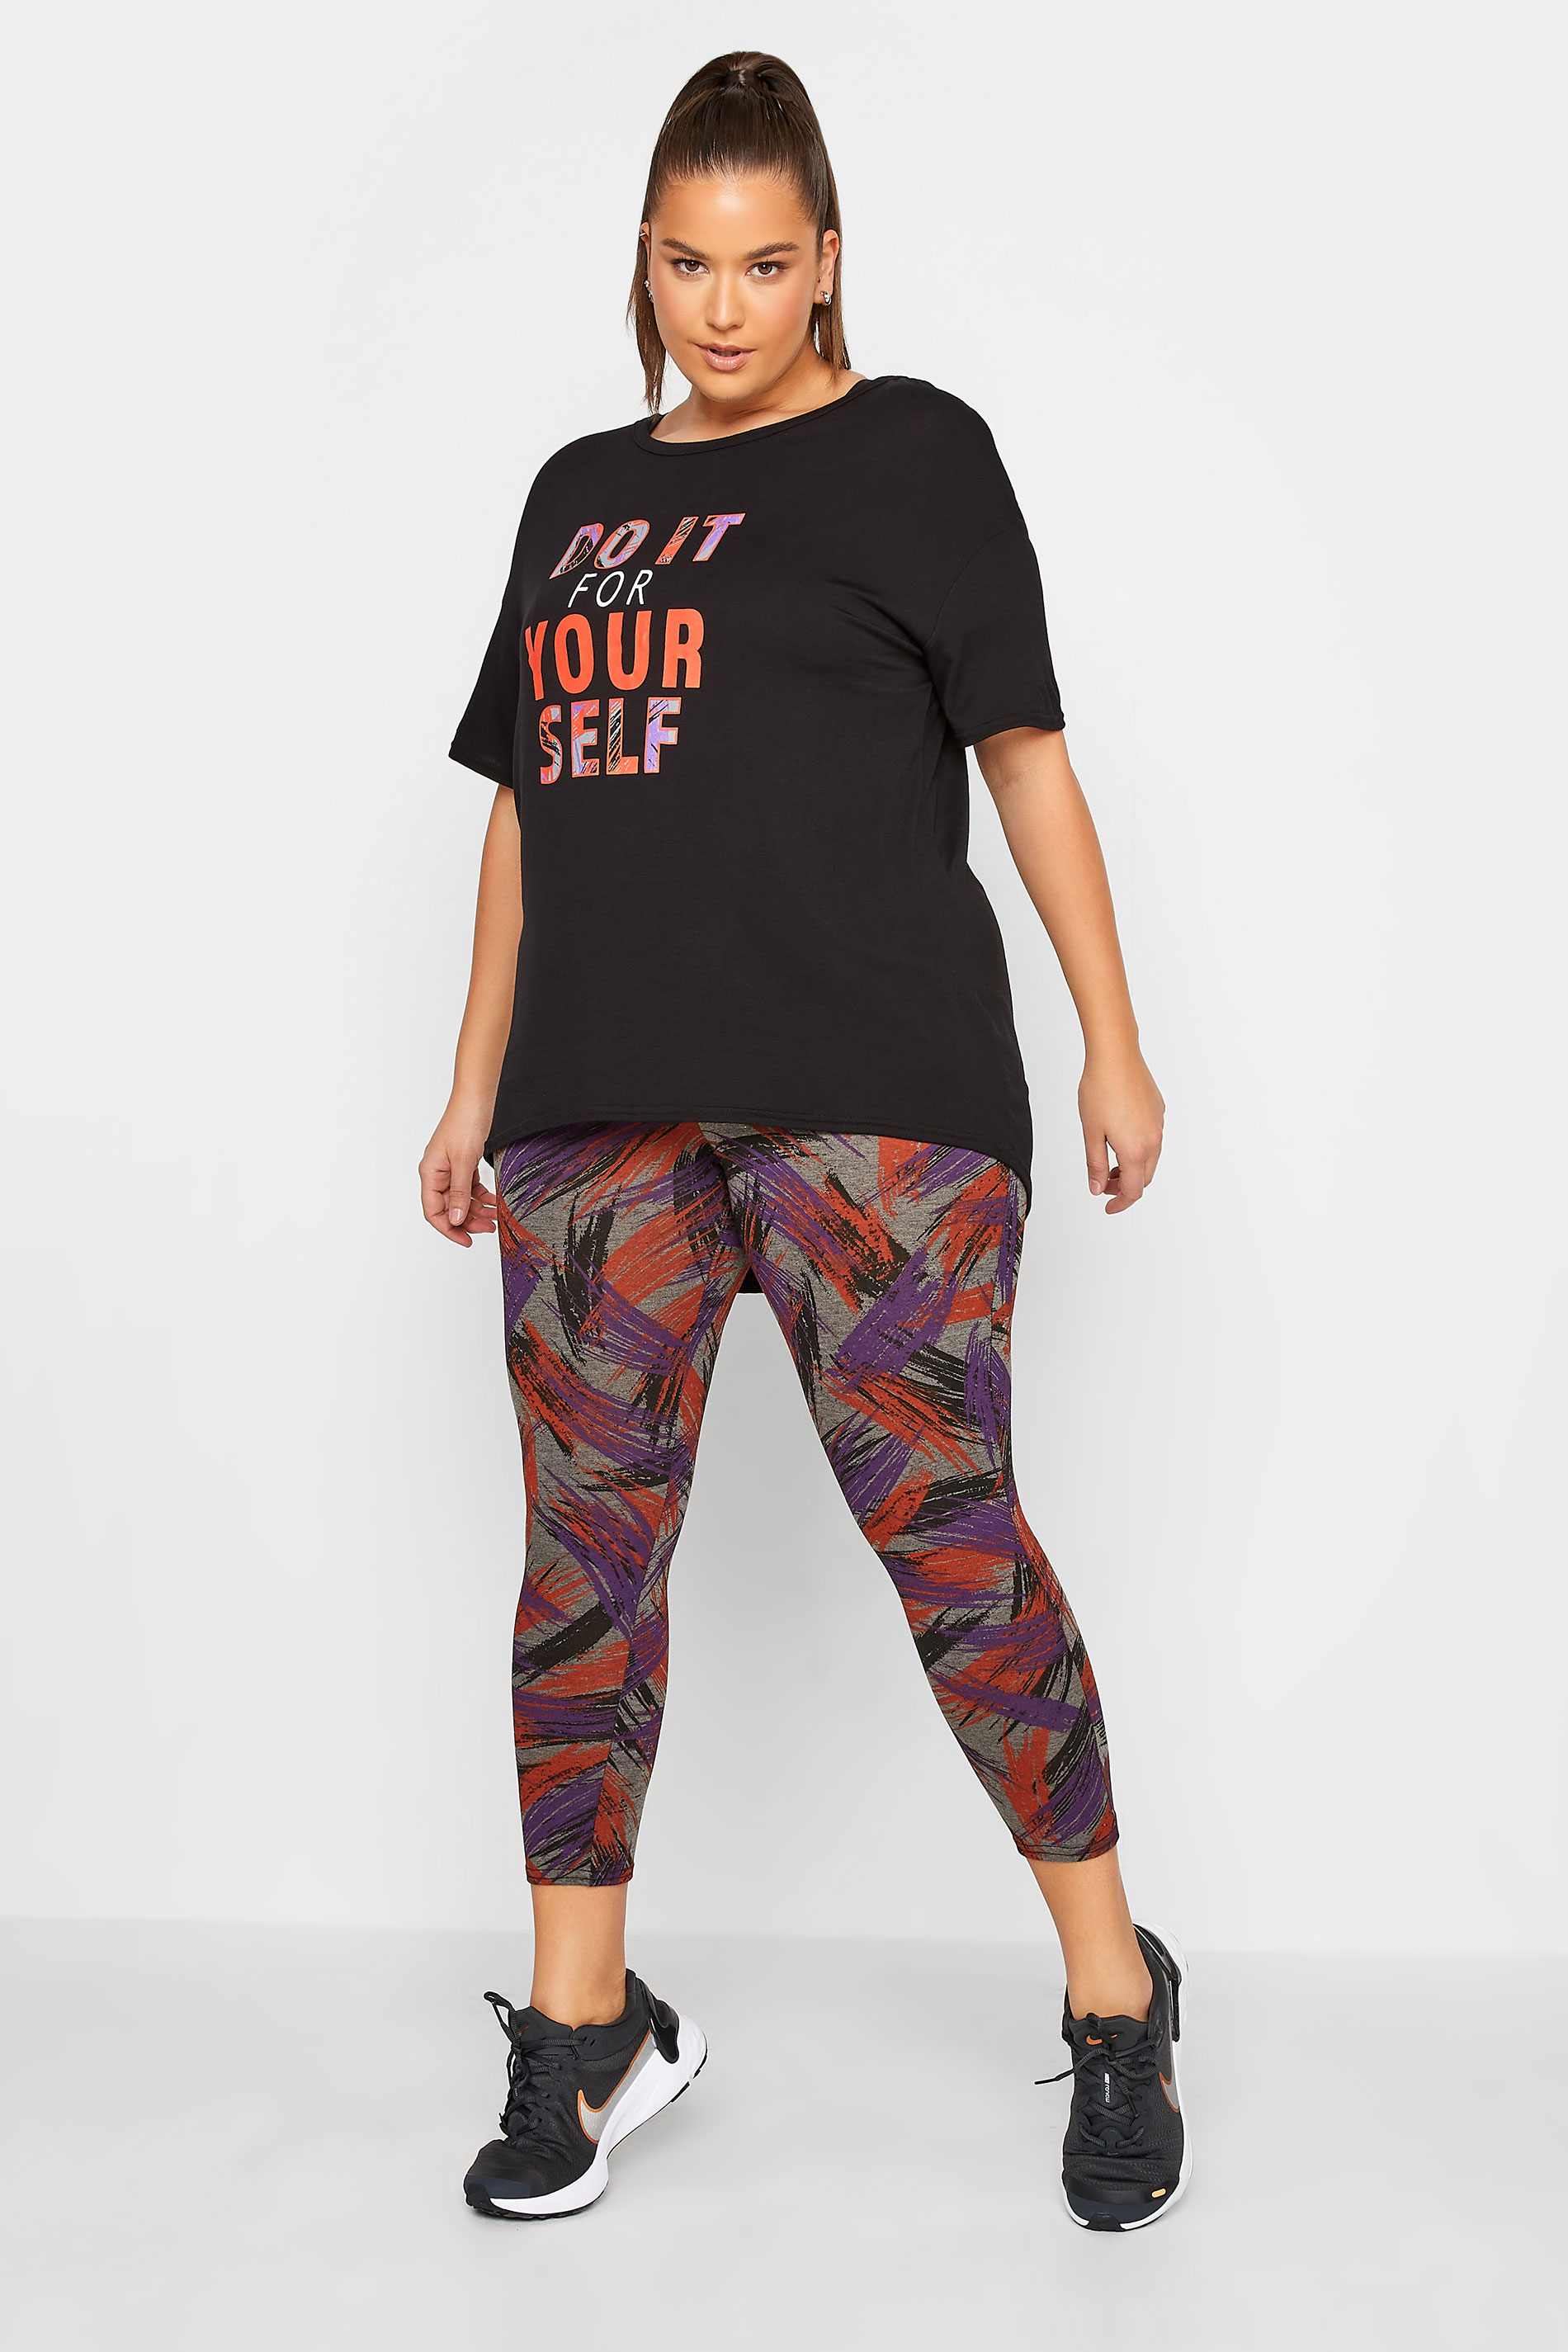 YOURS Curve Plus Size ACTIVE Black 'Do It For Yourself' Slogan T-Shirt | Yours Clothing 3